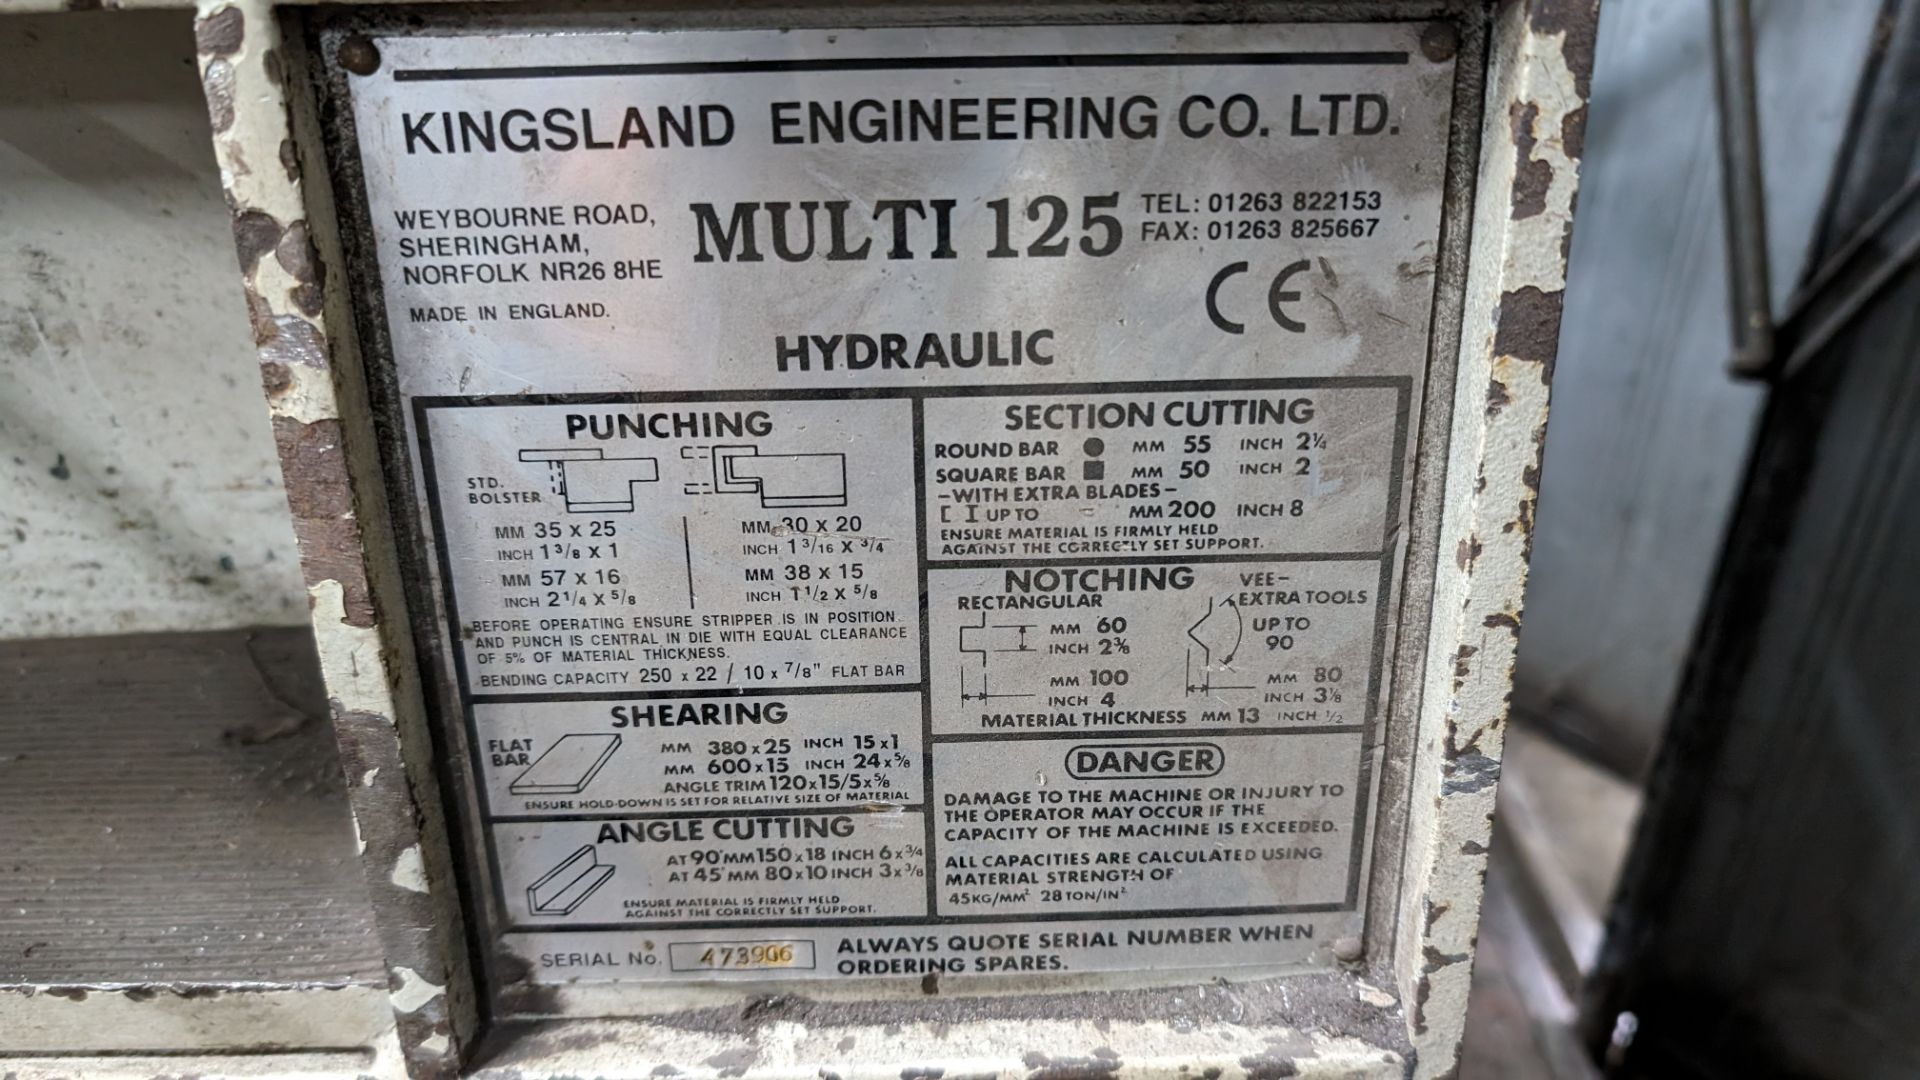 Kingsland multi 125 hydraulic metalworker, serial number 473906. Includes foot pedal plus tooling a - Image 6 of 22